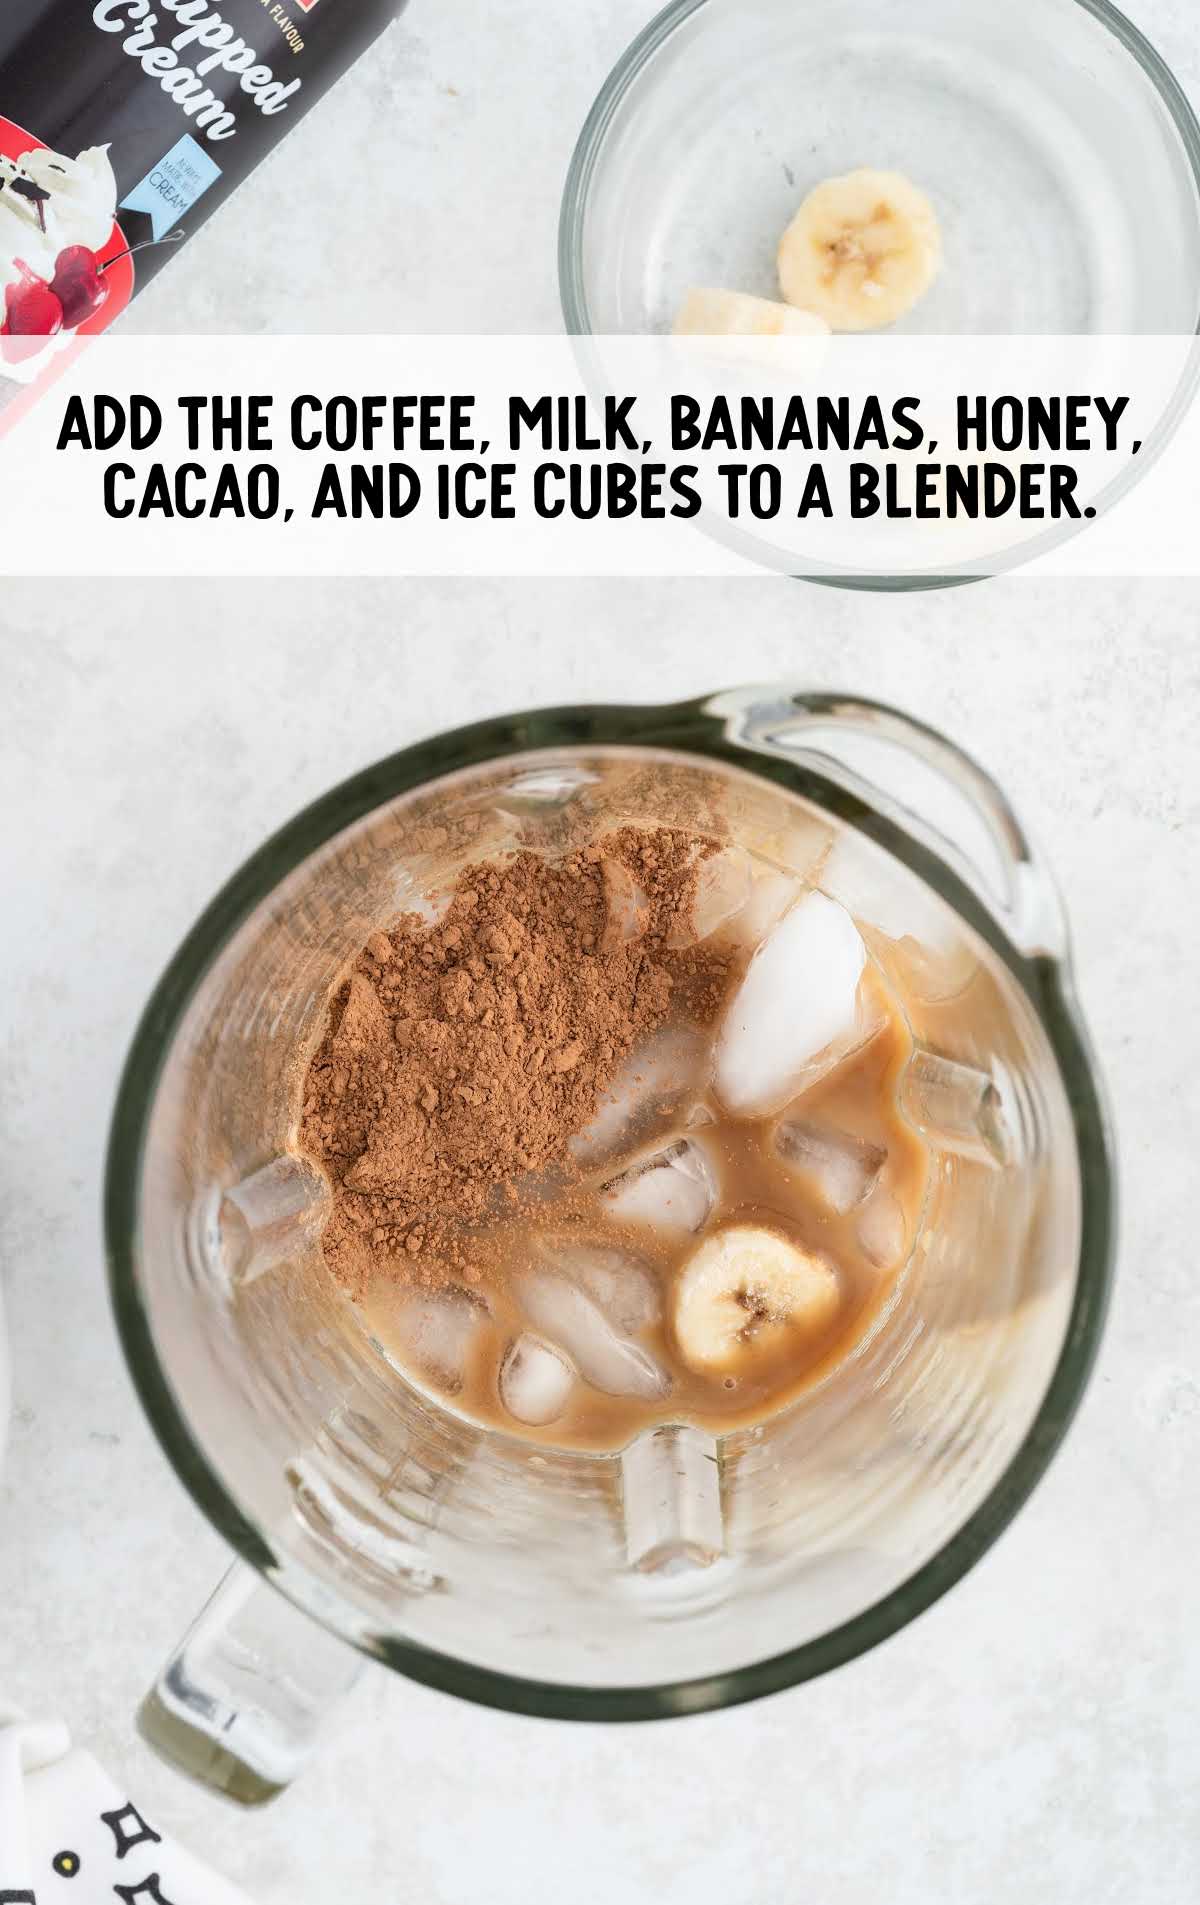 coffee, milk, bananas, honey, cacao, and ice cubes added to a blender